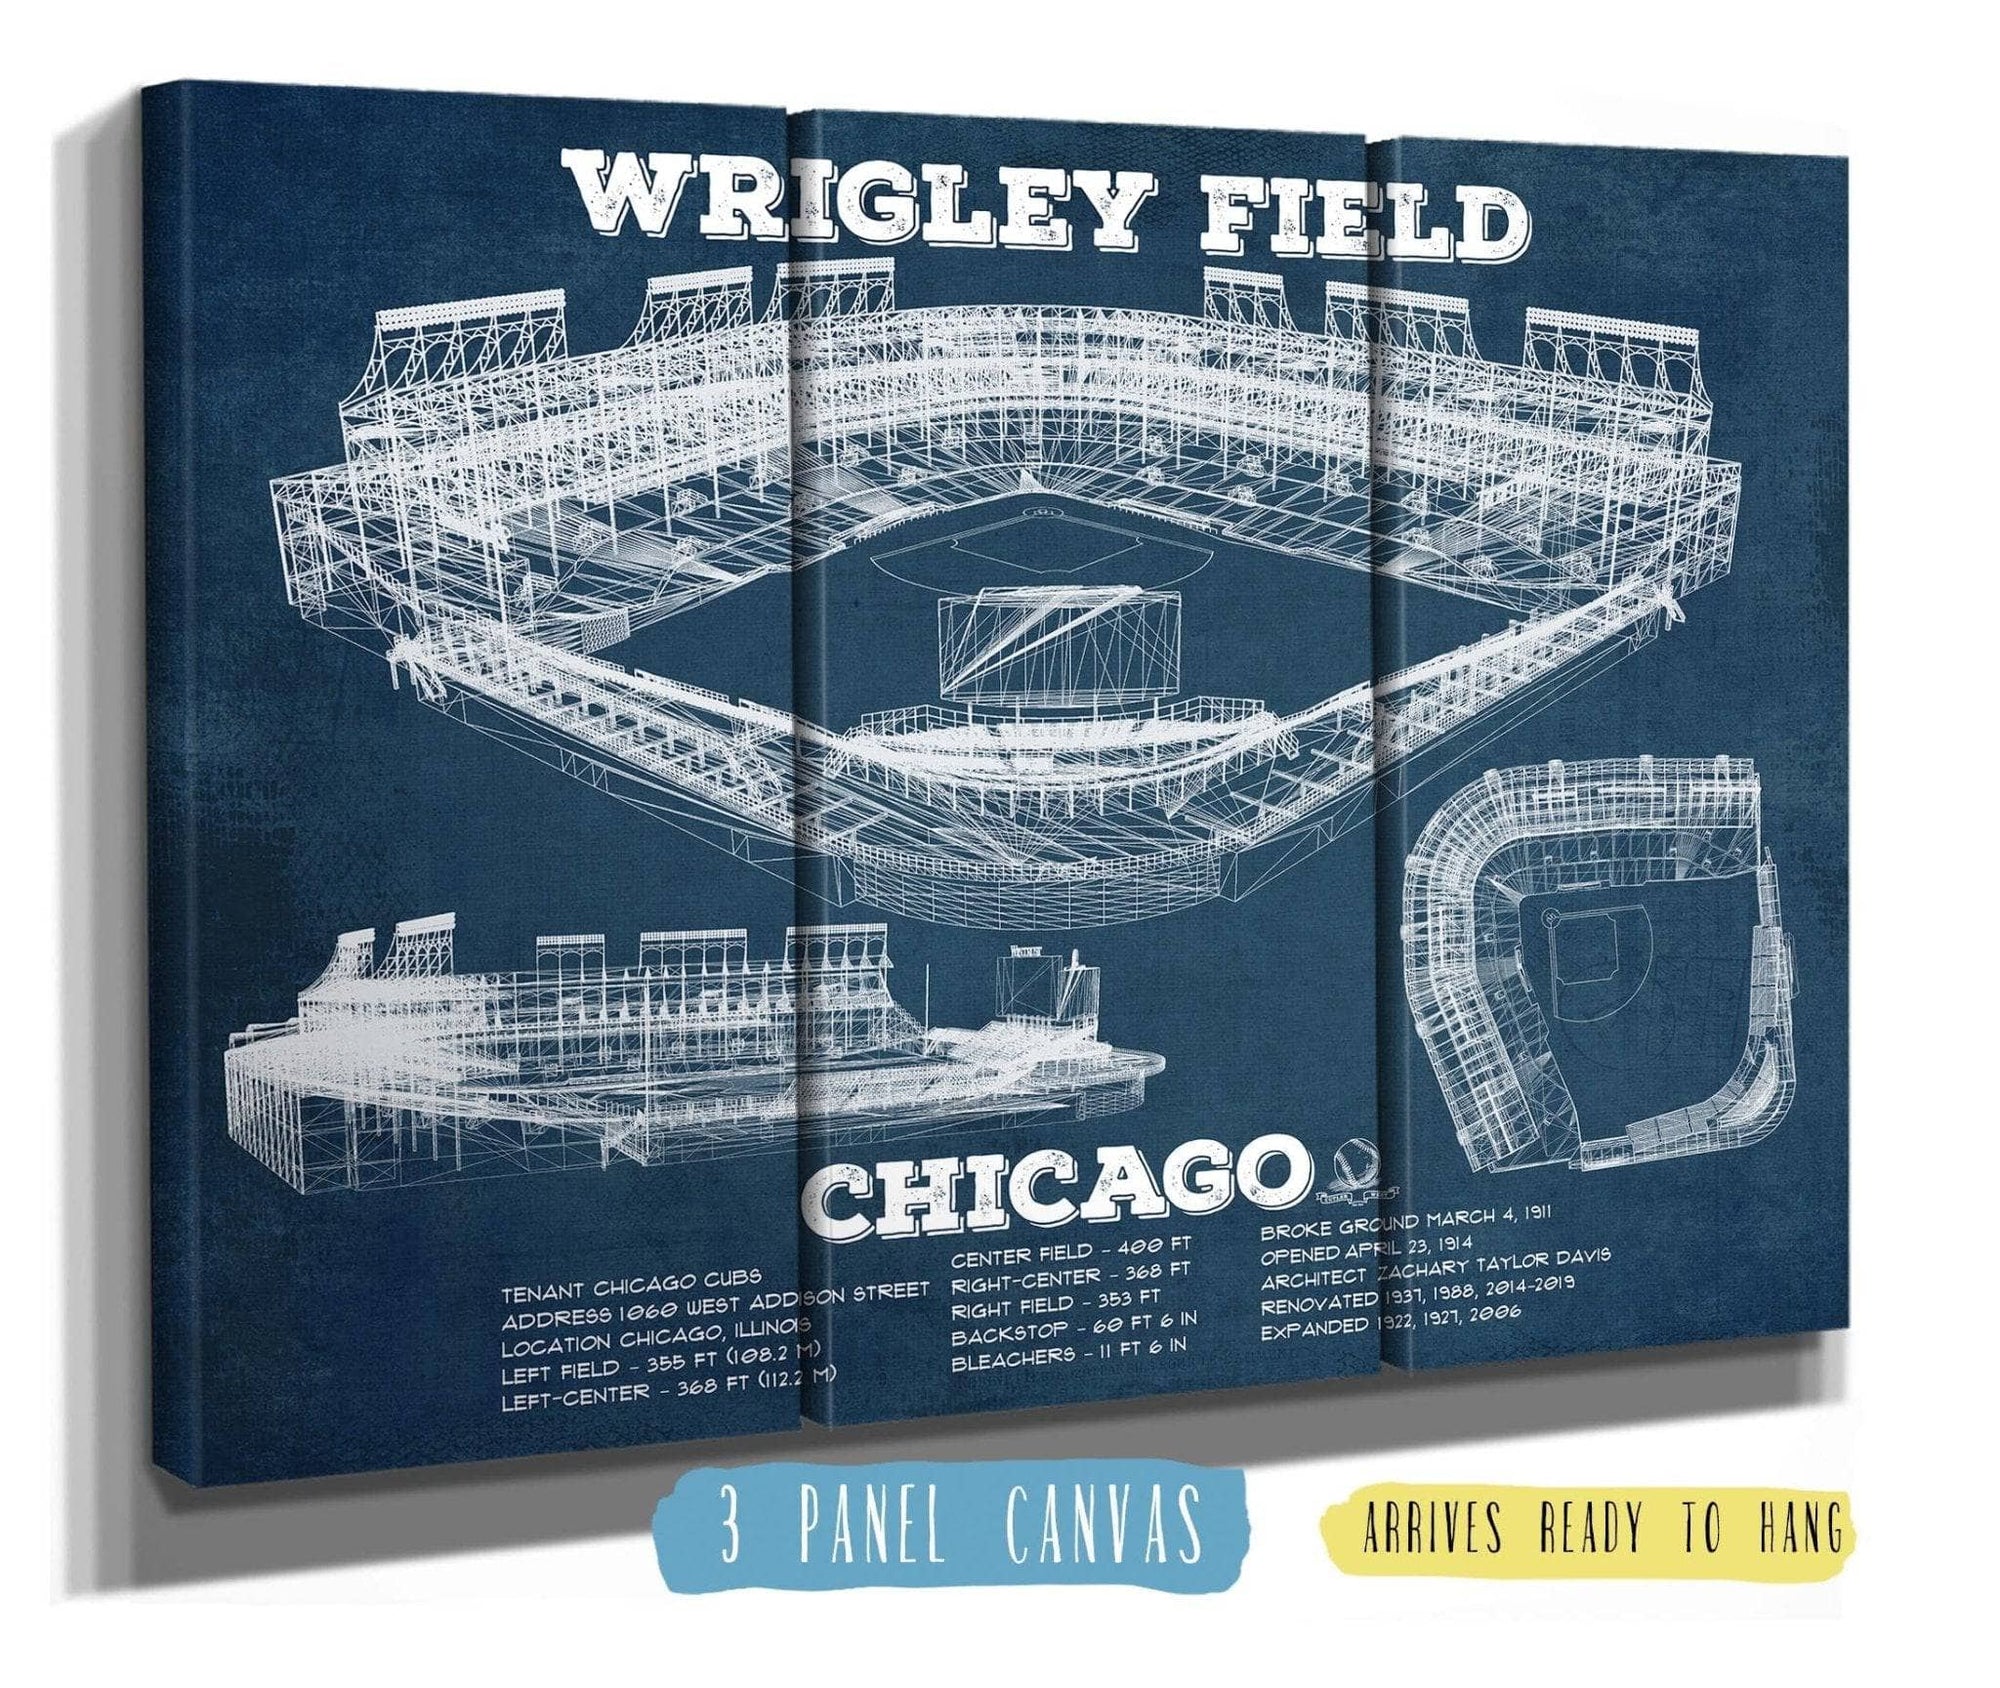 Cutler West Baseball Collection 48" x 32" / 3 Panel Canvas Wrap Vintage Wrigley Field Print - Chicago Cubs Baseball Print 723850098-TOP-48"-x-32"5391